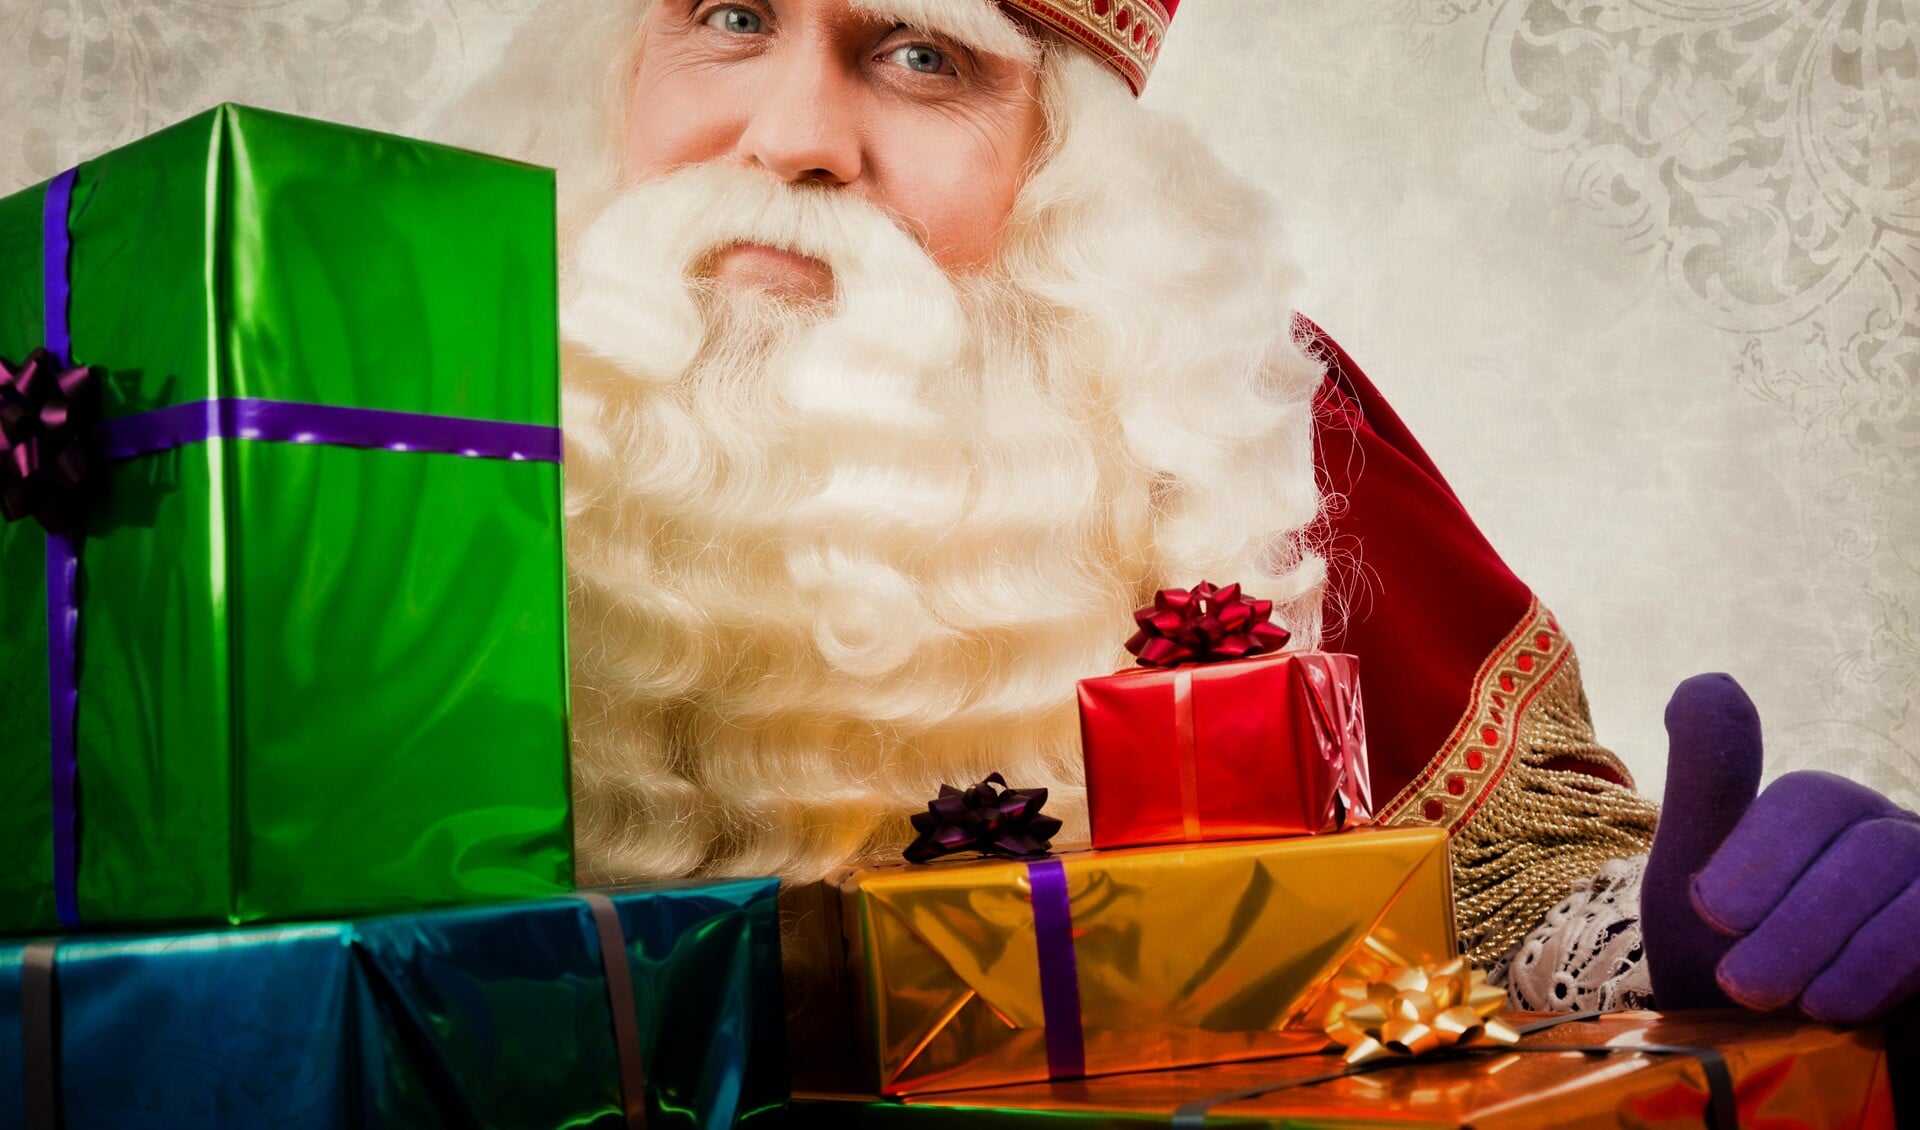 sinterklaas with gifts. Vintage Saint Nicholas in retro style with gifts. Dutch Santa Claus